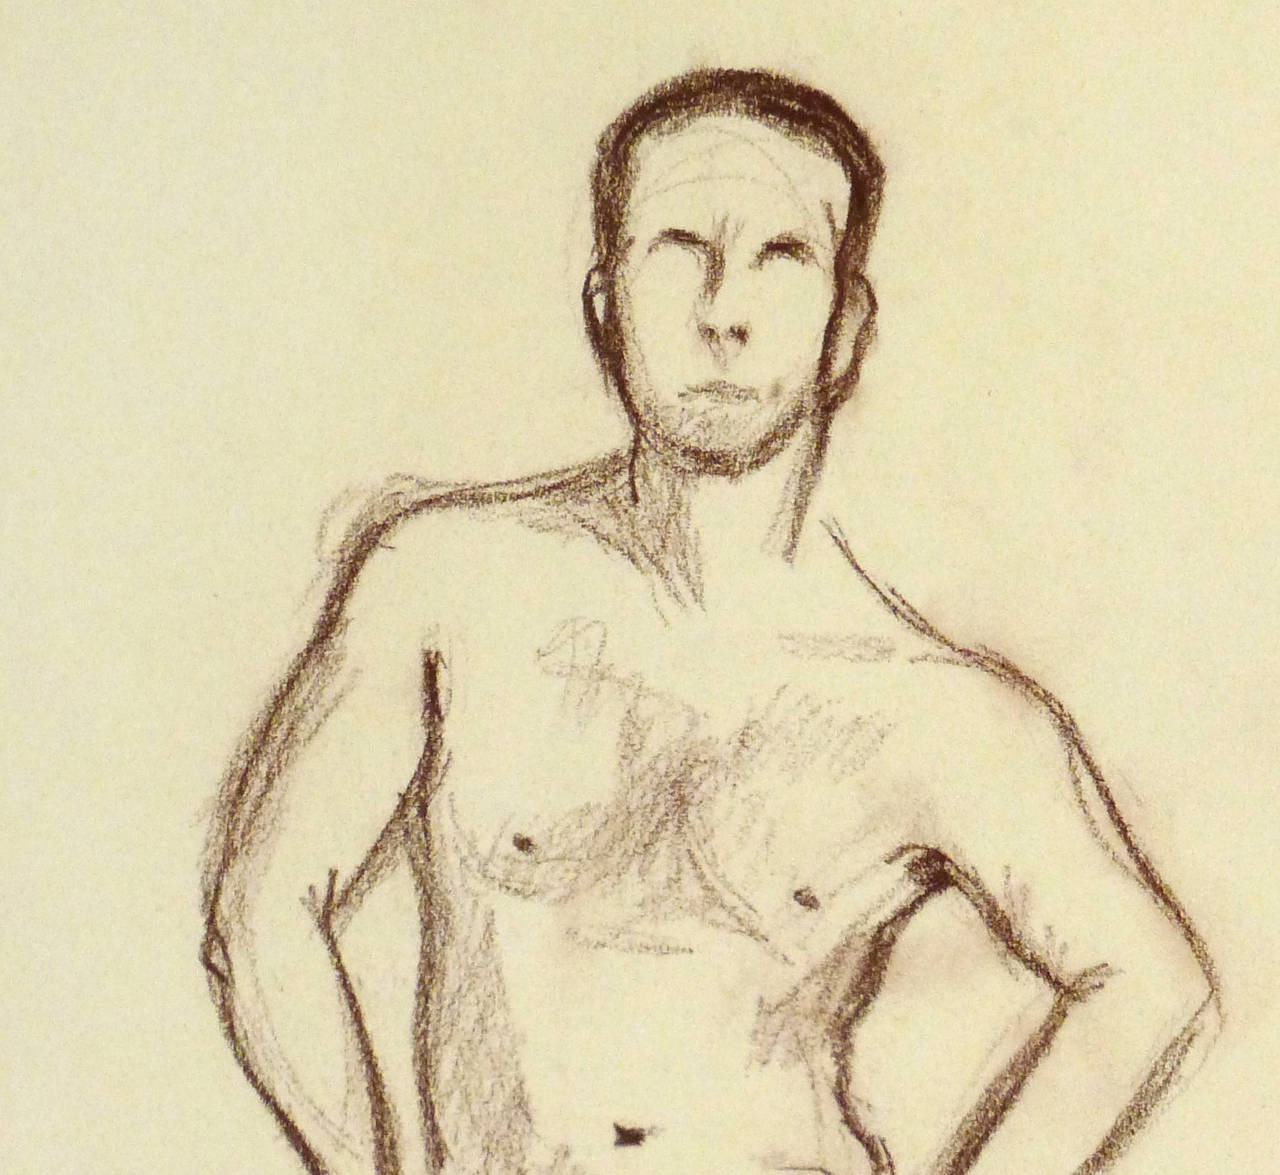 French charcoal sketch of a nude male striking a jaunty pose by Maurice Porte, 1997. Dated lower left, artist's stamp lower right.

Original one-of-a-kind artwork on paper displayed on a white mat with a gold border. Mat fits a standard-size